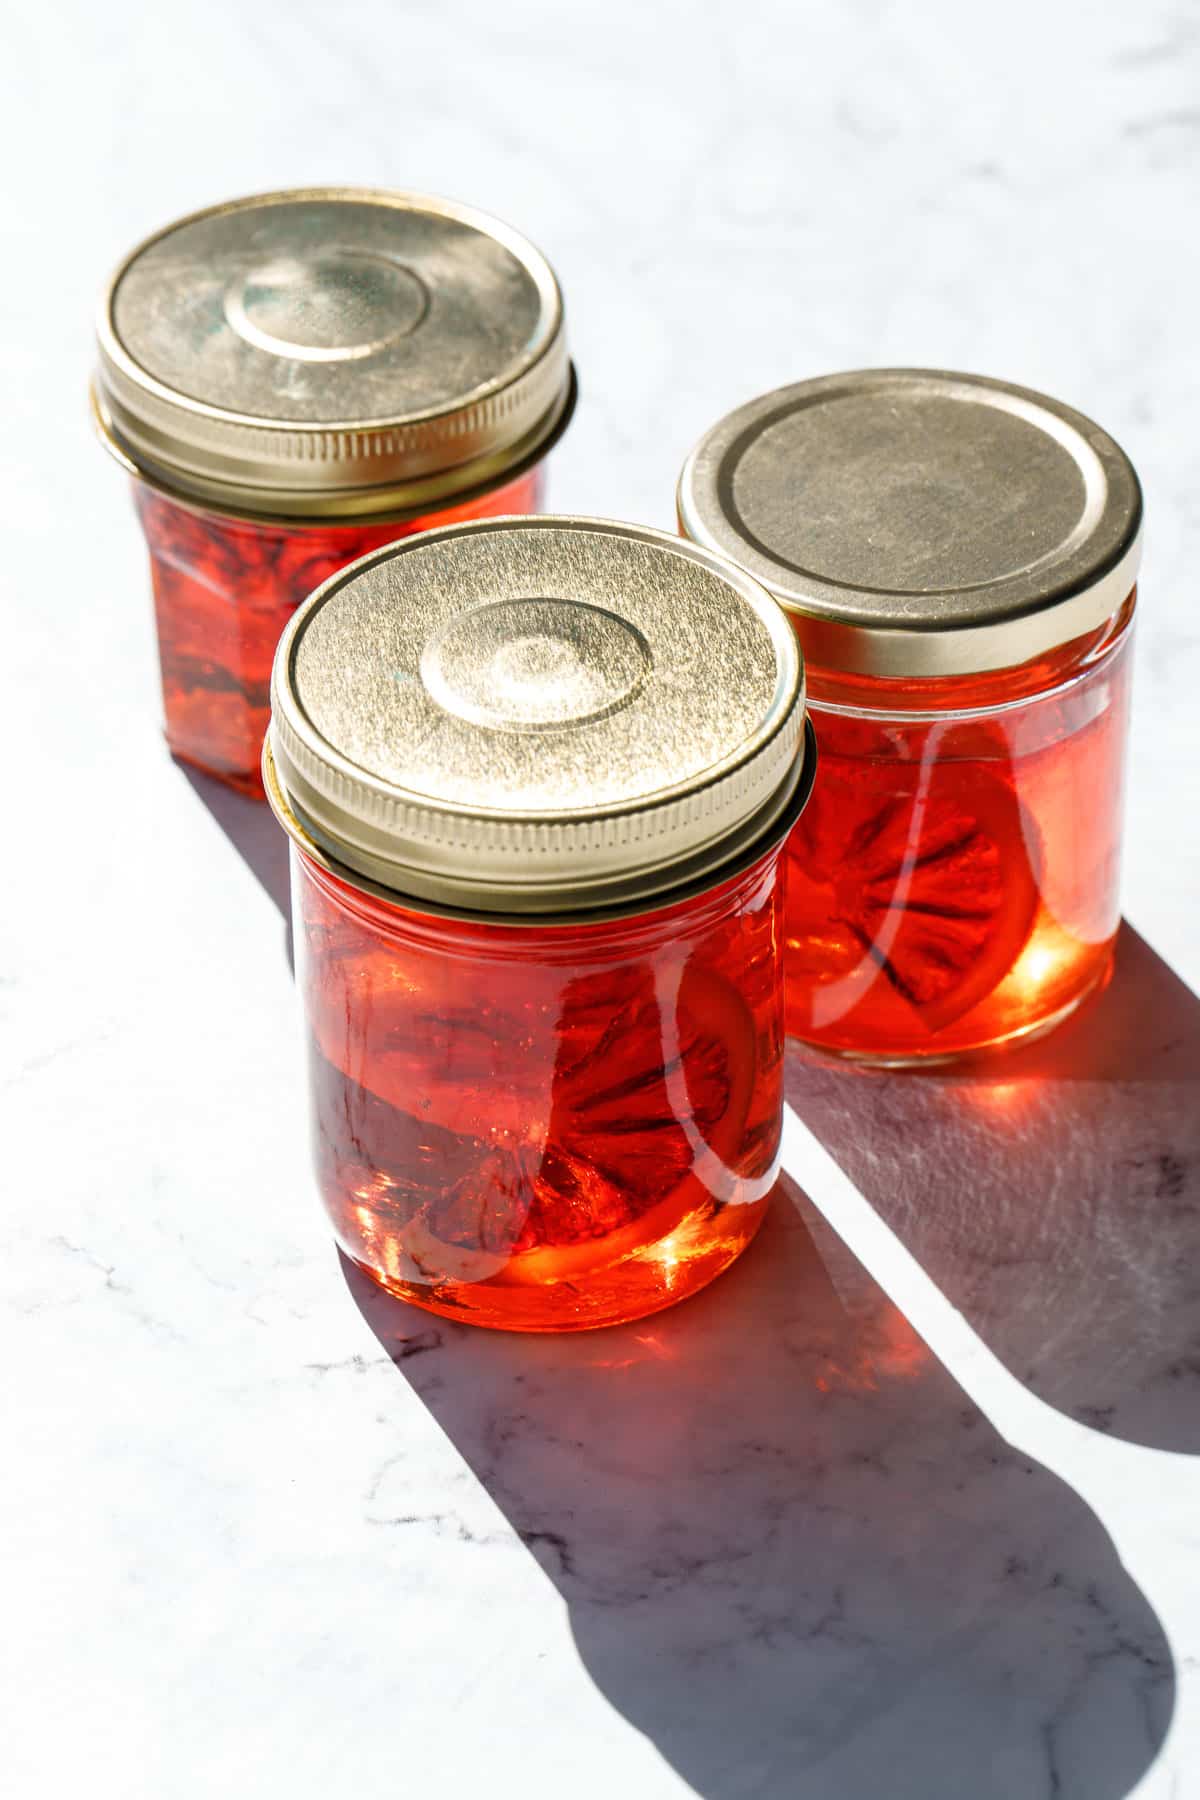 Jars of red candied blood orange syrup in glass jars with gold lids, backlit to show the slices of candied orange floating inside.